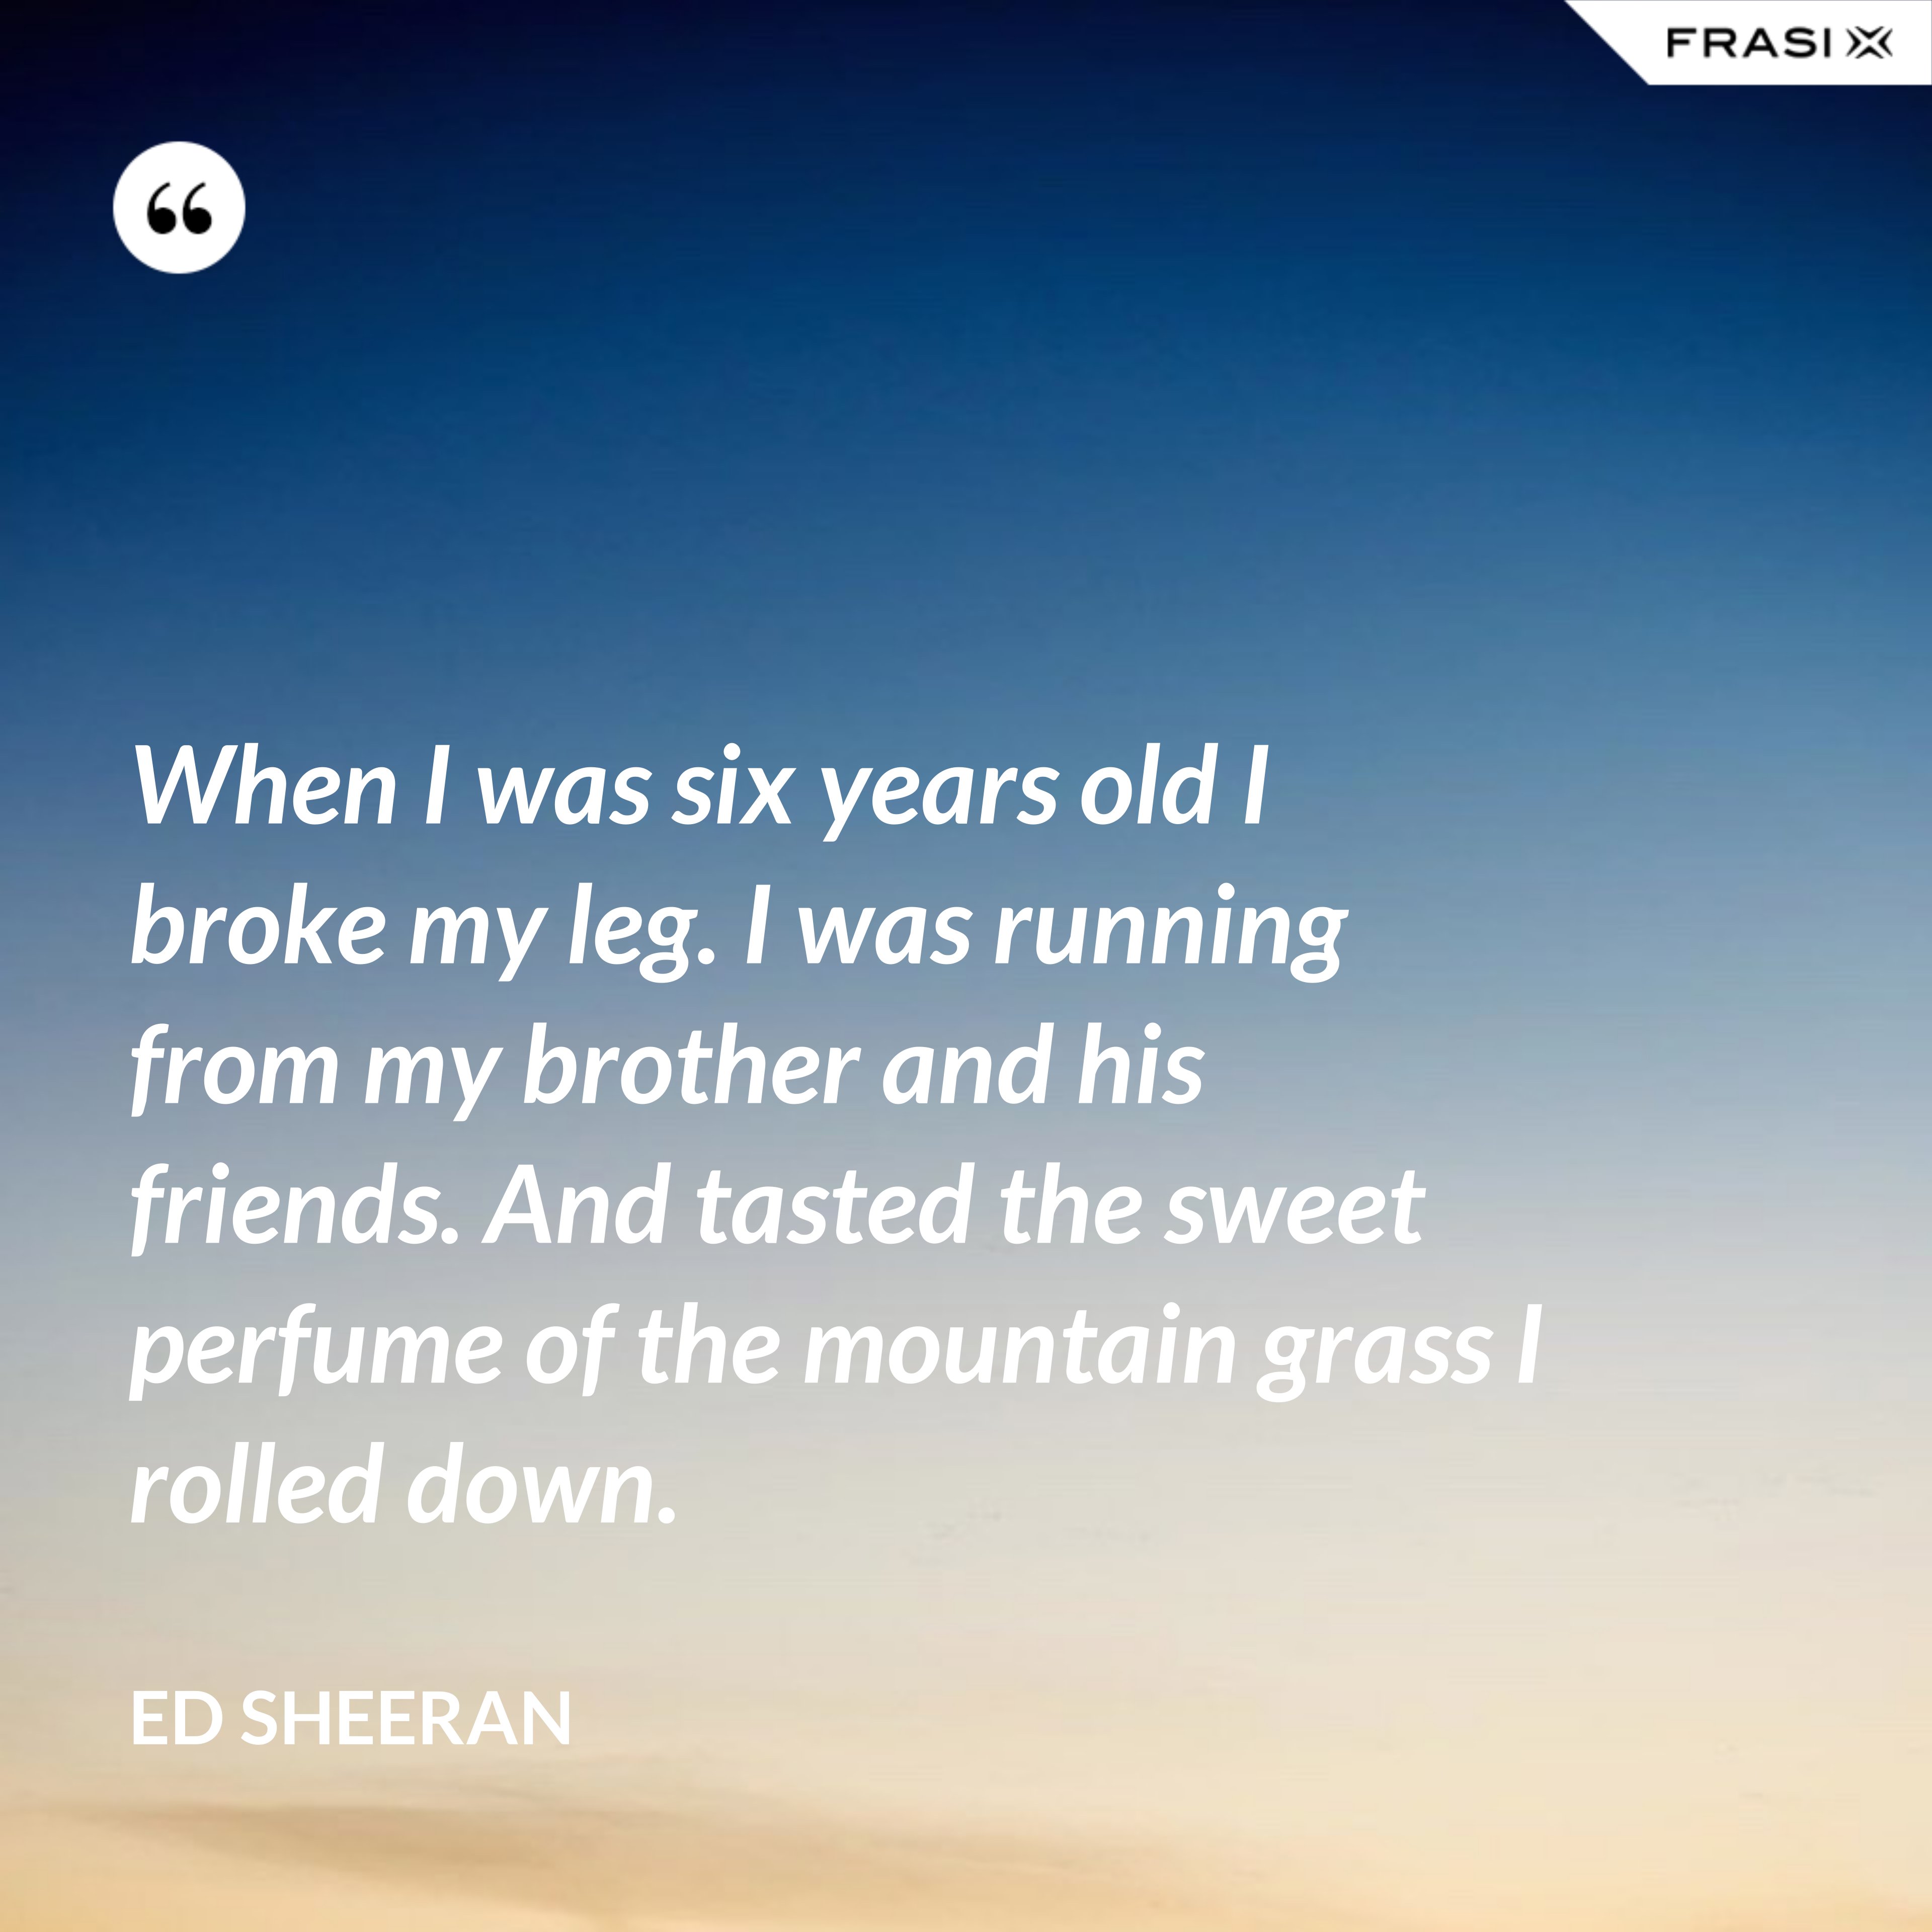 When I was six years old I broke my leg. I was running from my brother and his friends. And tasted the sweet perfume of the mountain grass I rolled down. - Ed Sheeran